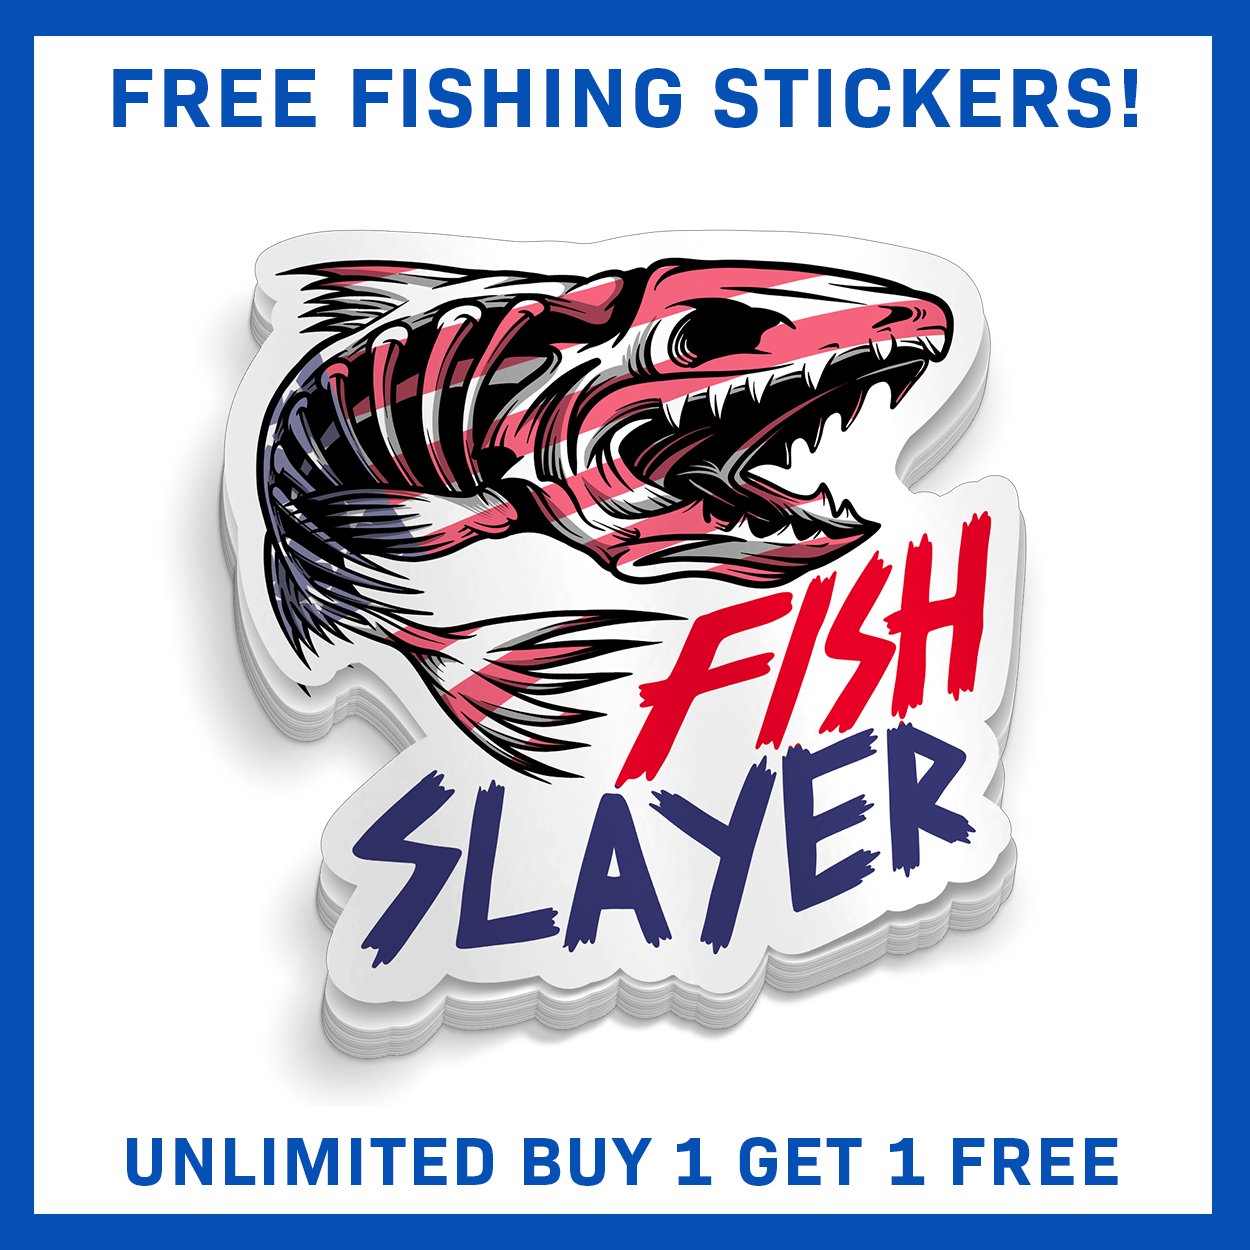 Rippin Lips Bass Kayak Vinyl Wrap Kit Graphic Decal/Sticker 12ft and 14ft